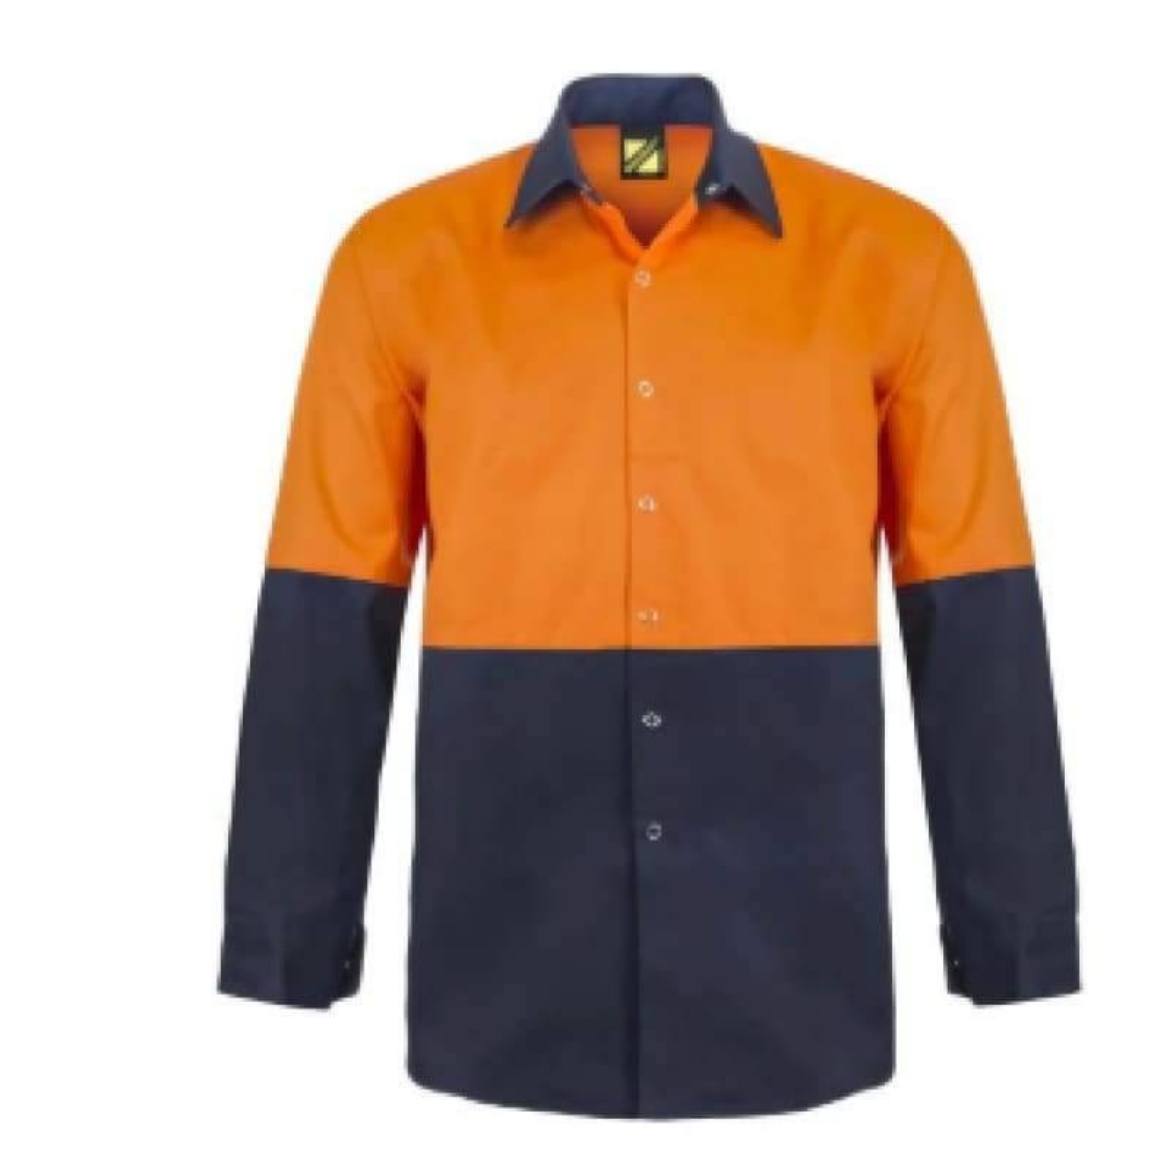 Picture of WorkCraft, Shirt, Long Sleeve, Food Industry, Hi Vis, Two Tone, Cotton Drill, Press Studs, No Pockets